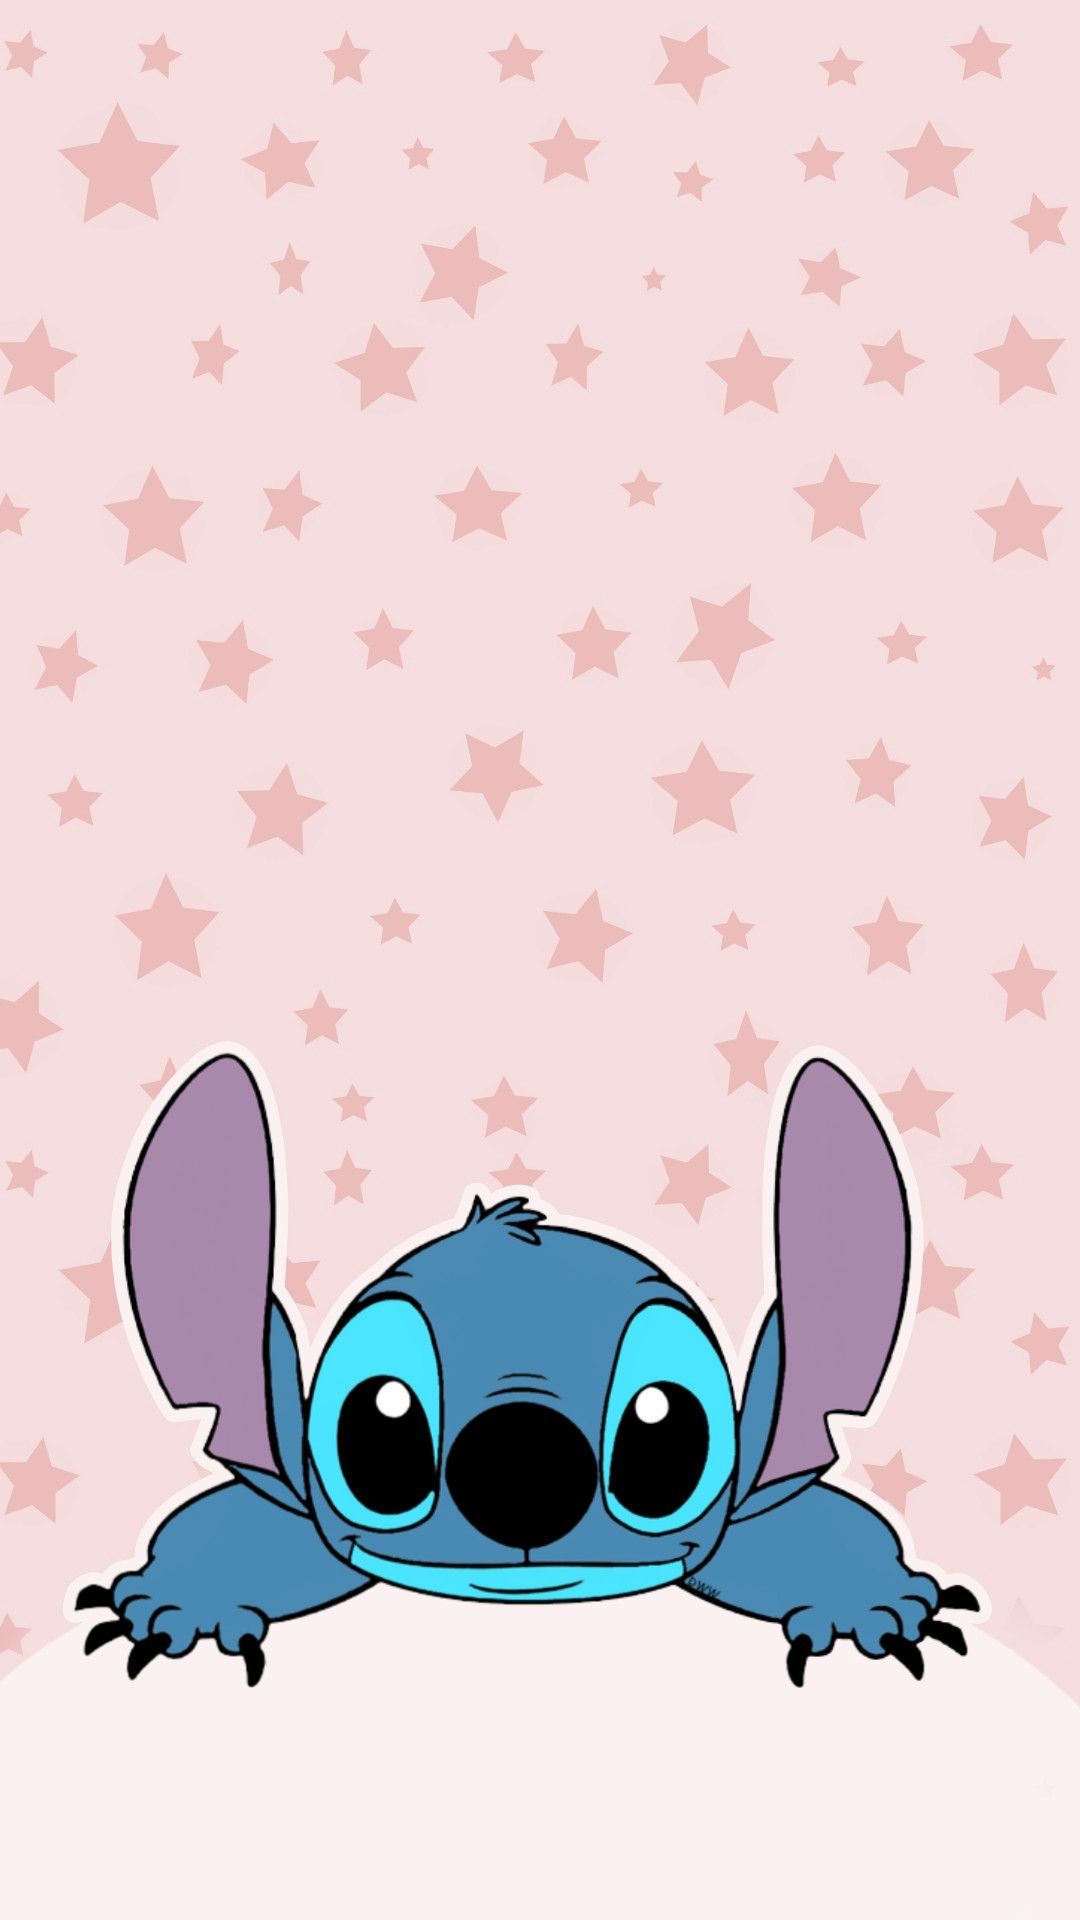 Stitch wallpaper for your phone by me! - Stitch